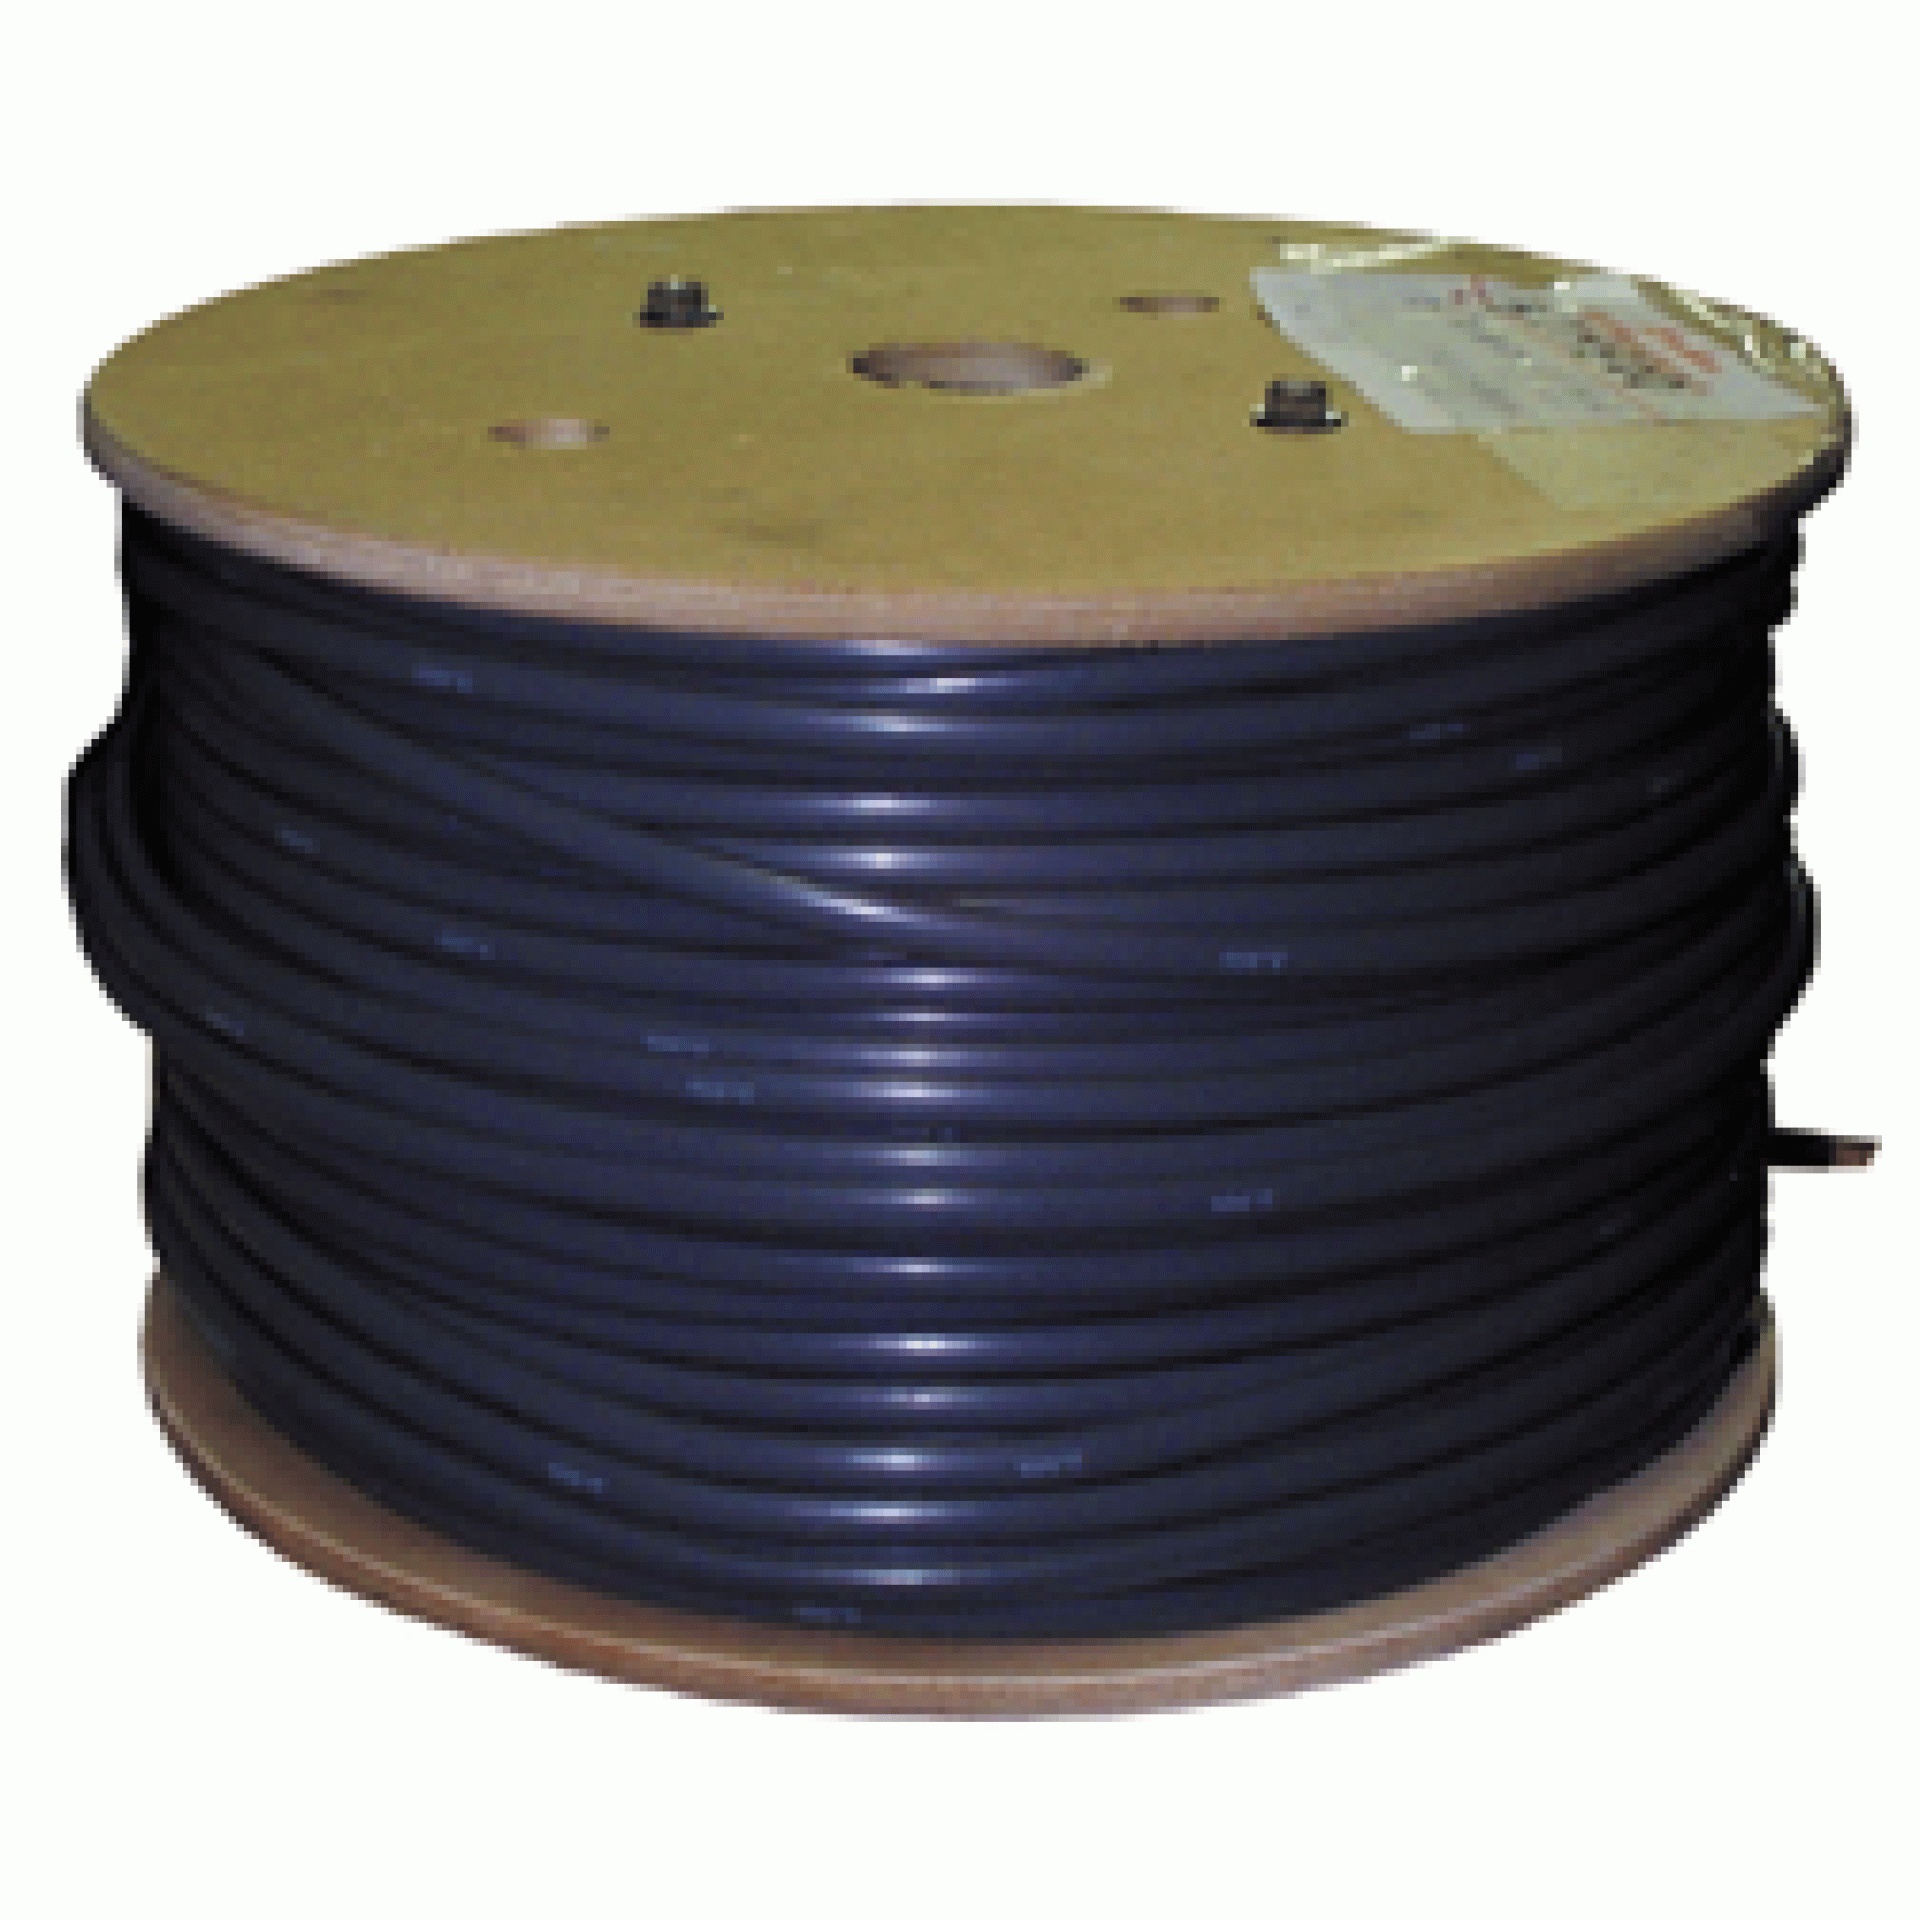 DEKA | 03213 | JACKETED BRAKE WIRE - STRANDED COPPER WIRE WITH BLACK AND WHITE WITH GRAY JACKET 500'- 12-2